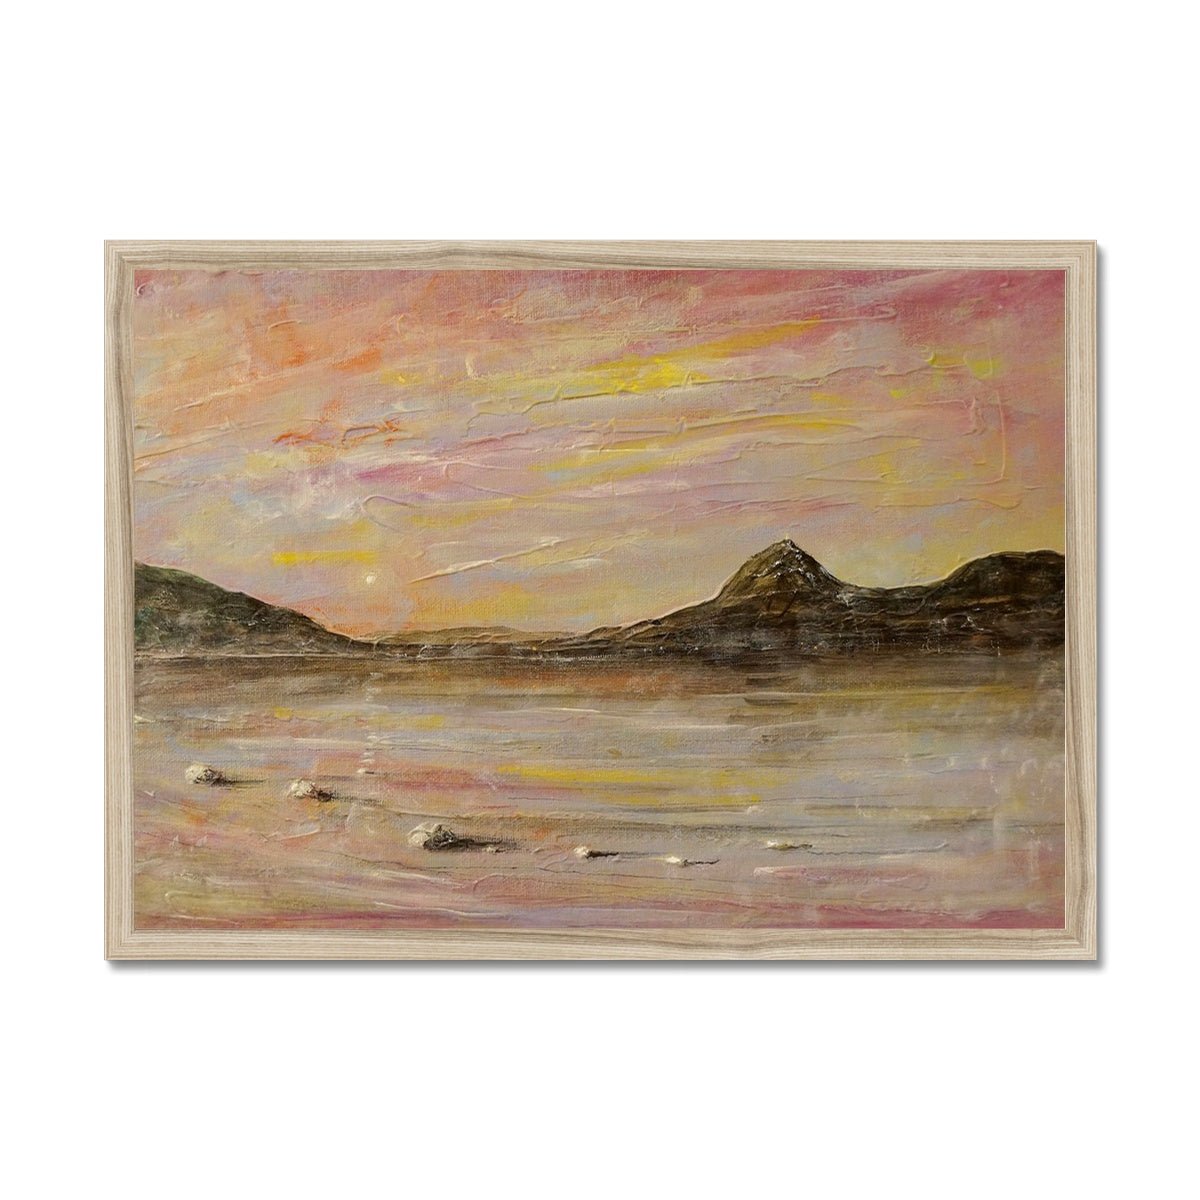 Loch Rannoch Dawn Painting | Framed Prints From Scotland-Framed Prints-Scottish Lochs & Mountains Art Gallery-A2 Landscape-Natural Frame-Paintings, Prints, Homeware, Art Gifts From Scotland By Scottish Artist Kevin Hunter